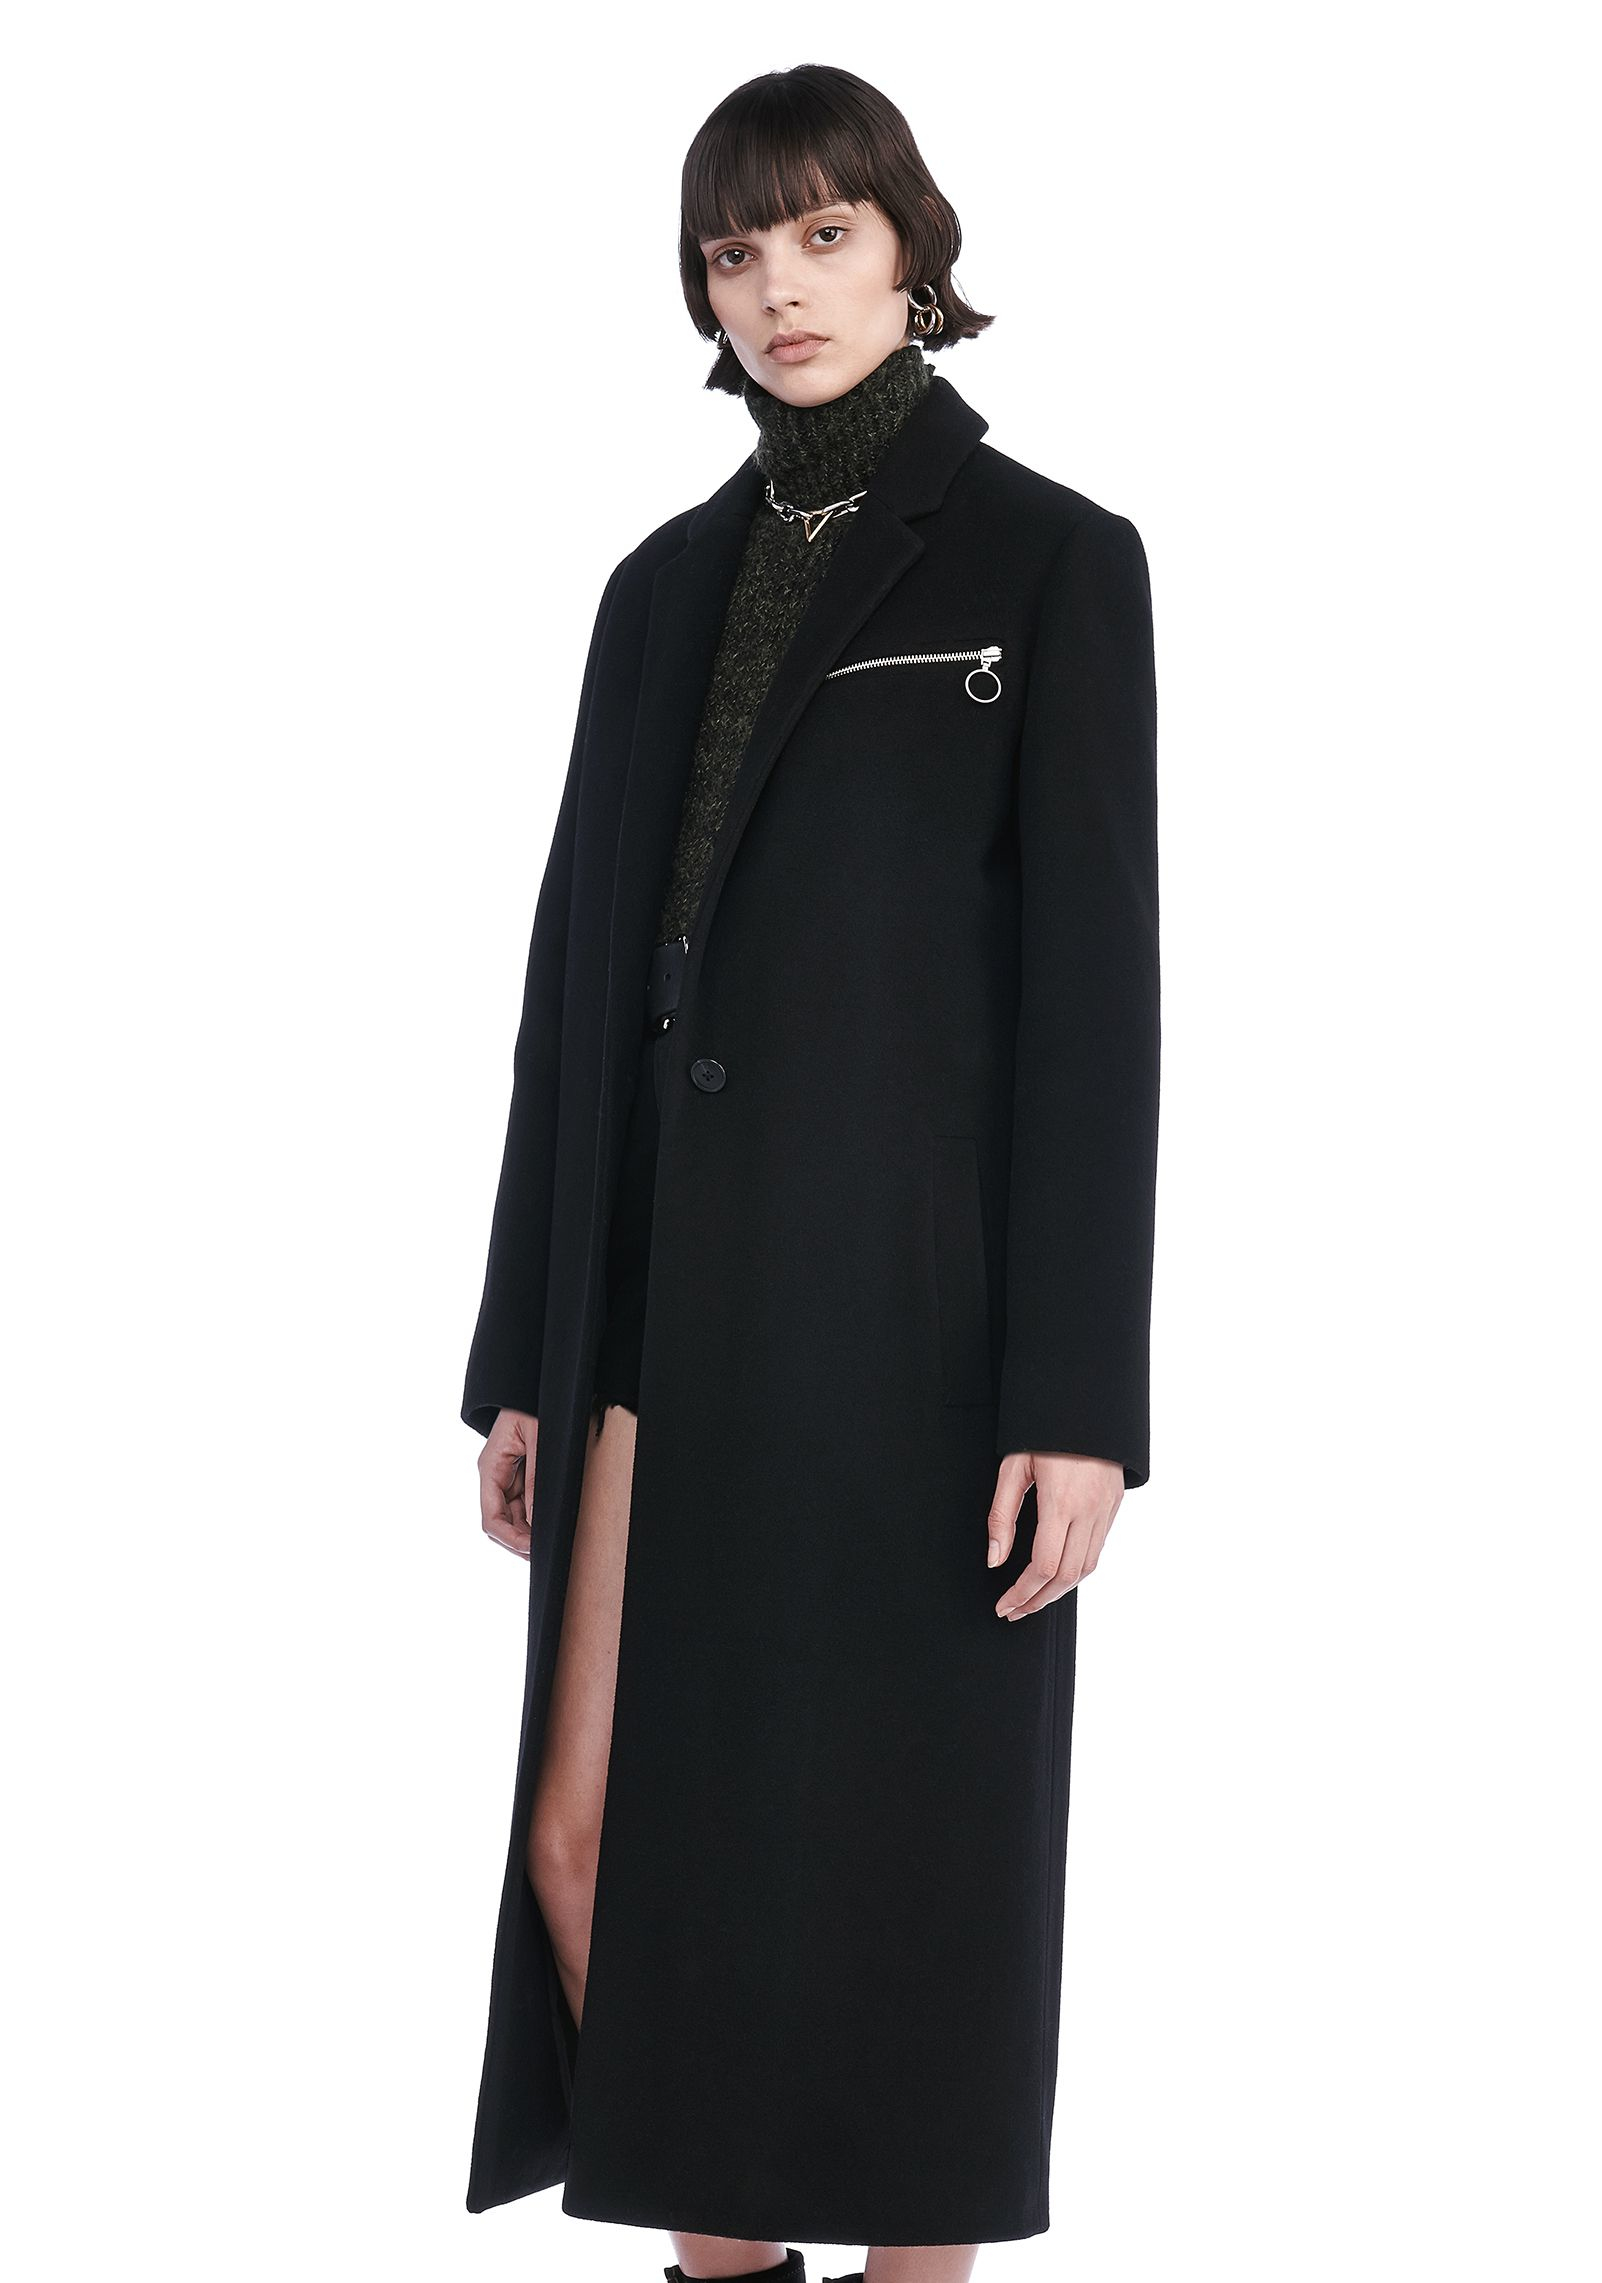 Lyst - T By Alexander Wang Collared Long Car Coat in Black